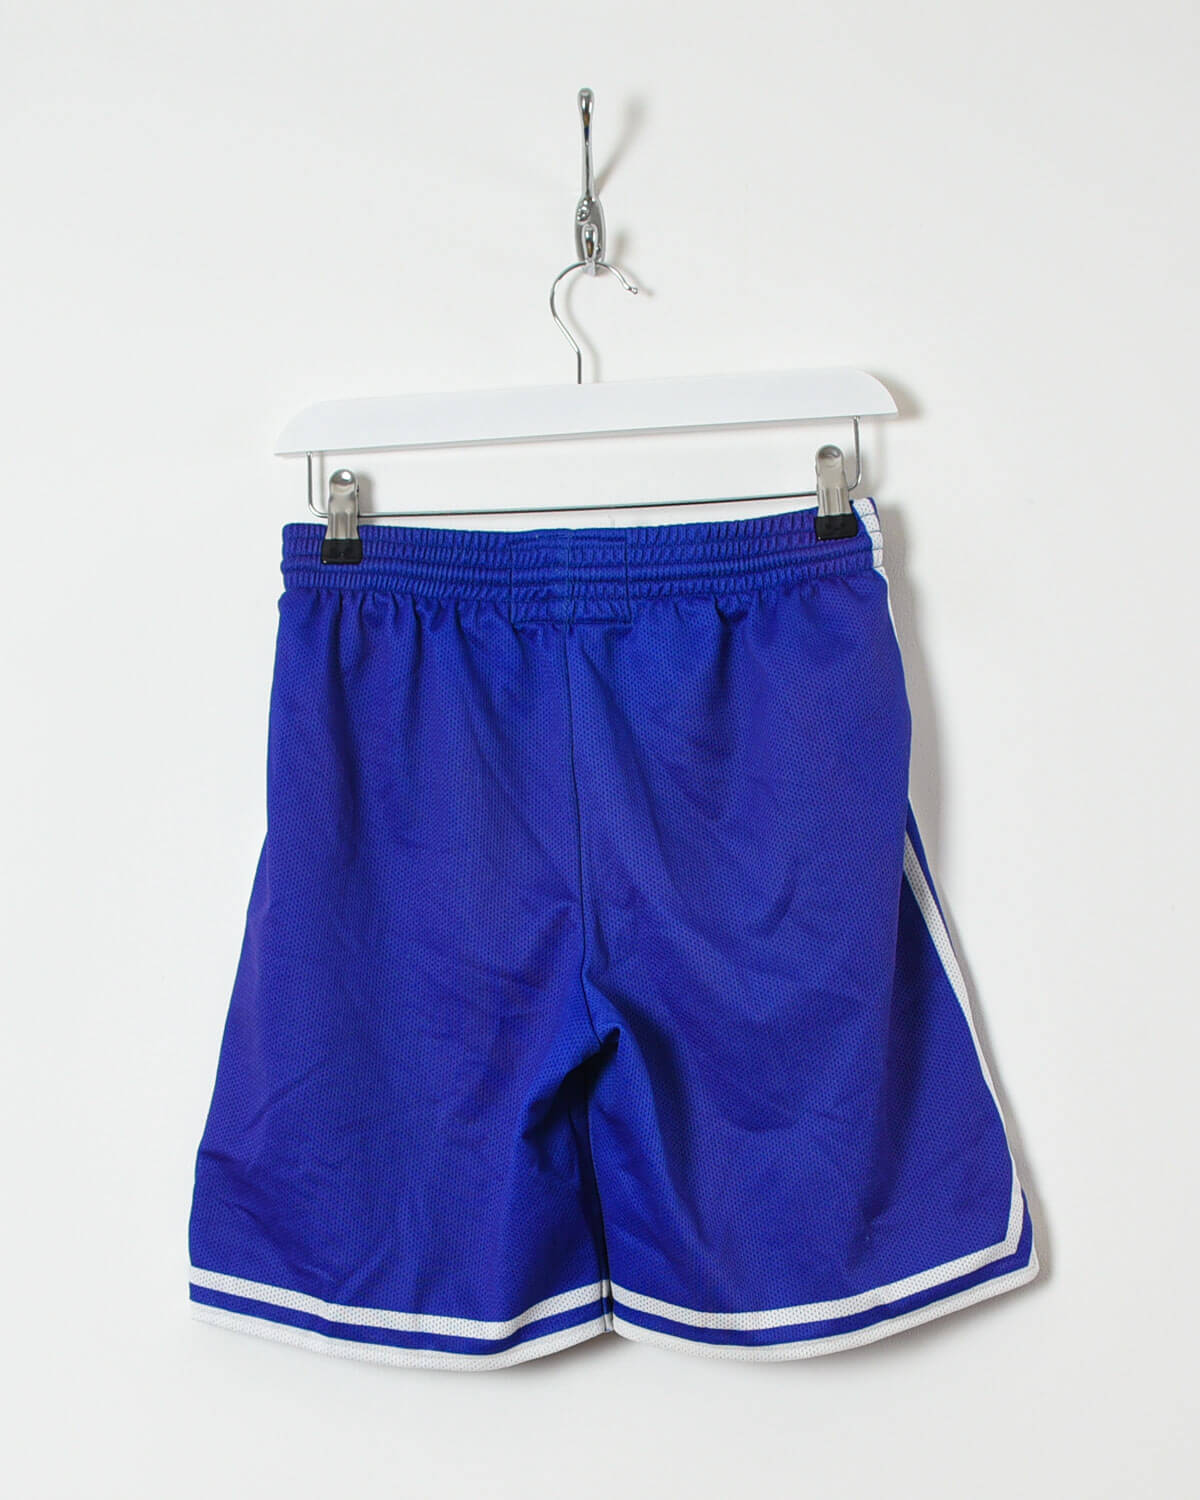 Champion Shorts - W26 - Domno Vintage 90s, 80s, 00s Retro and Vintage Clothing 